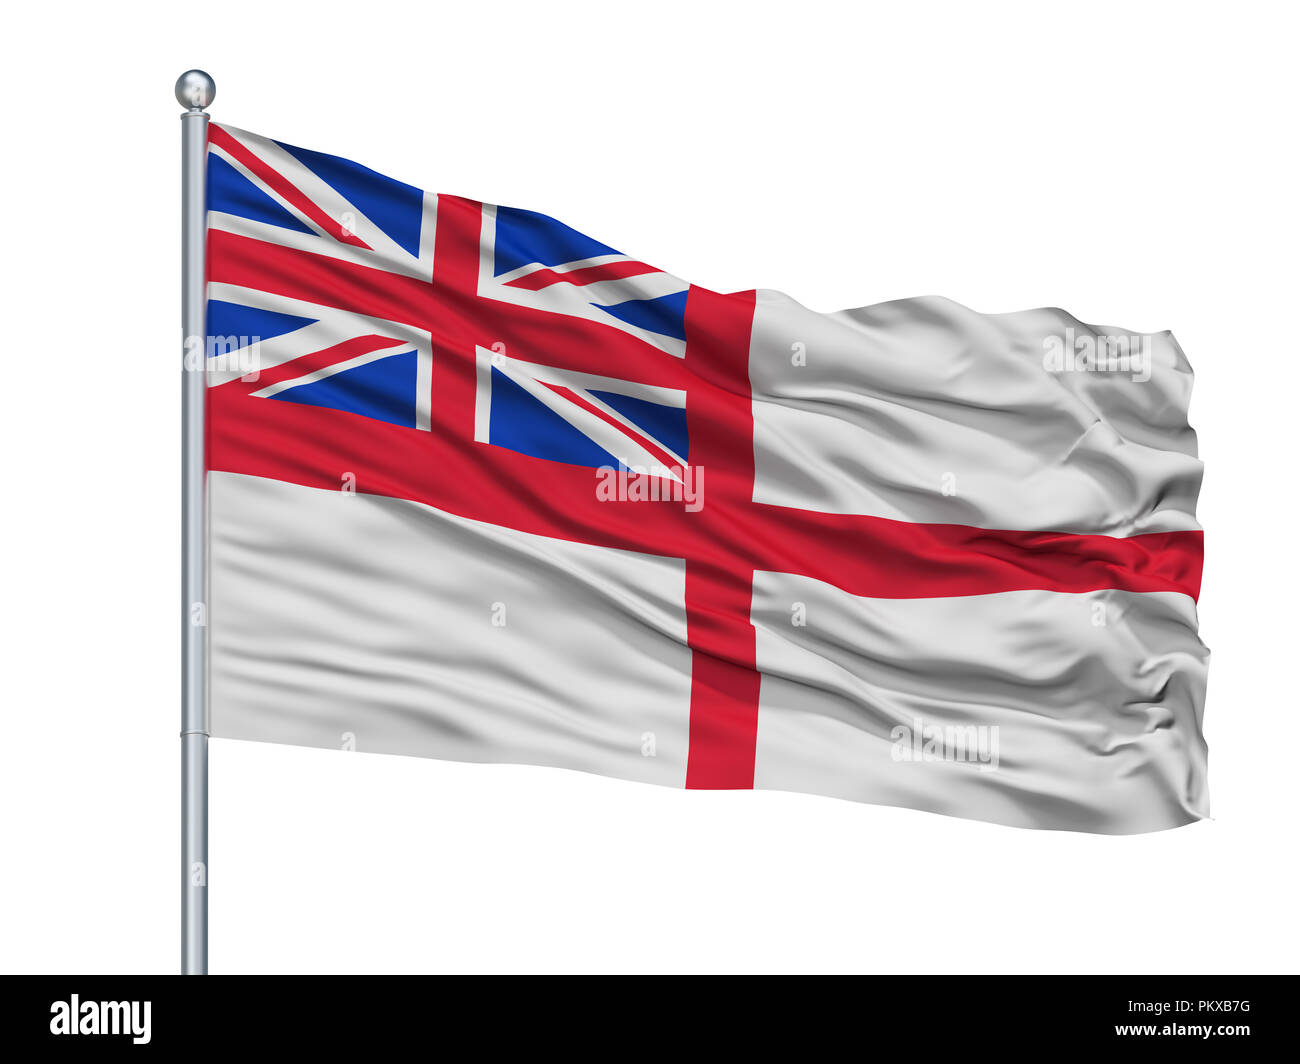 United Kingdom Naval Ensign Flag On Flagpole, Isolated On White Background, 3D Rendering Stock Photo